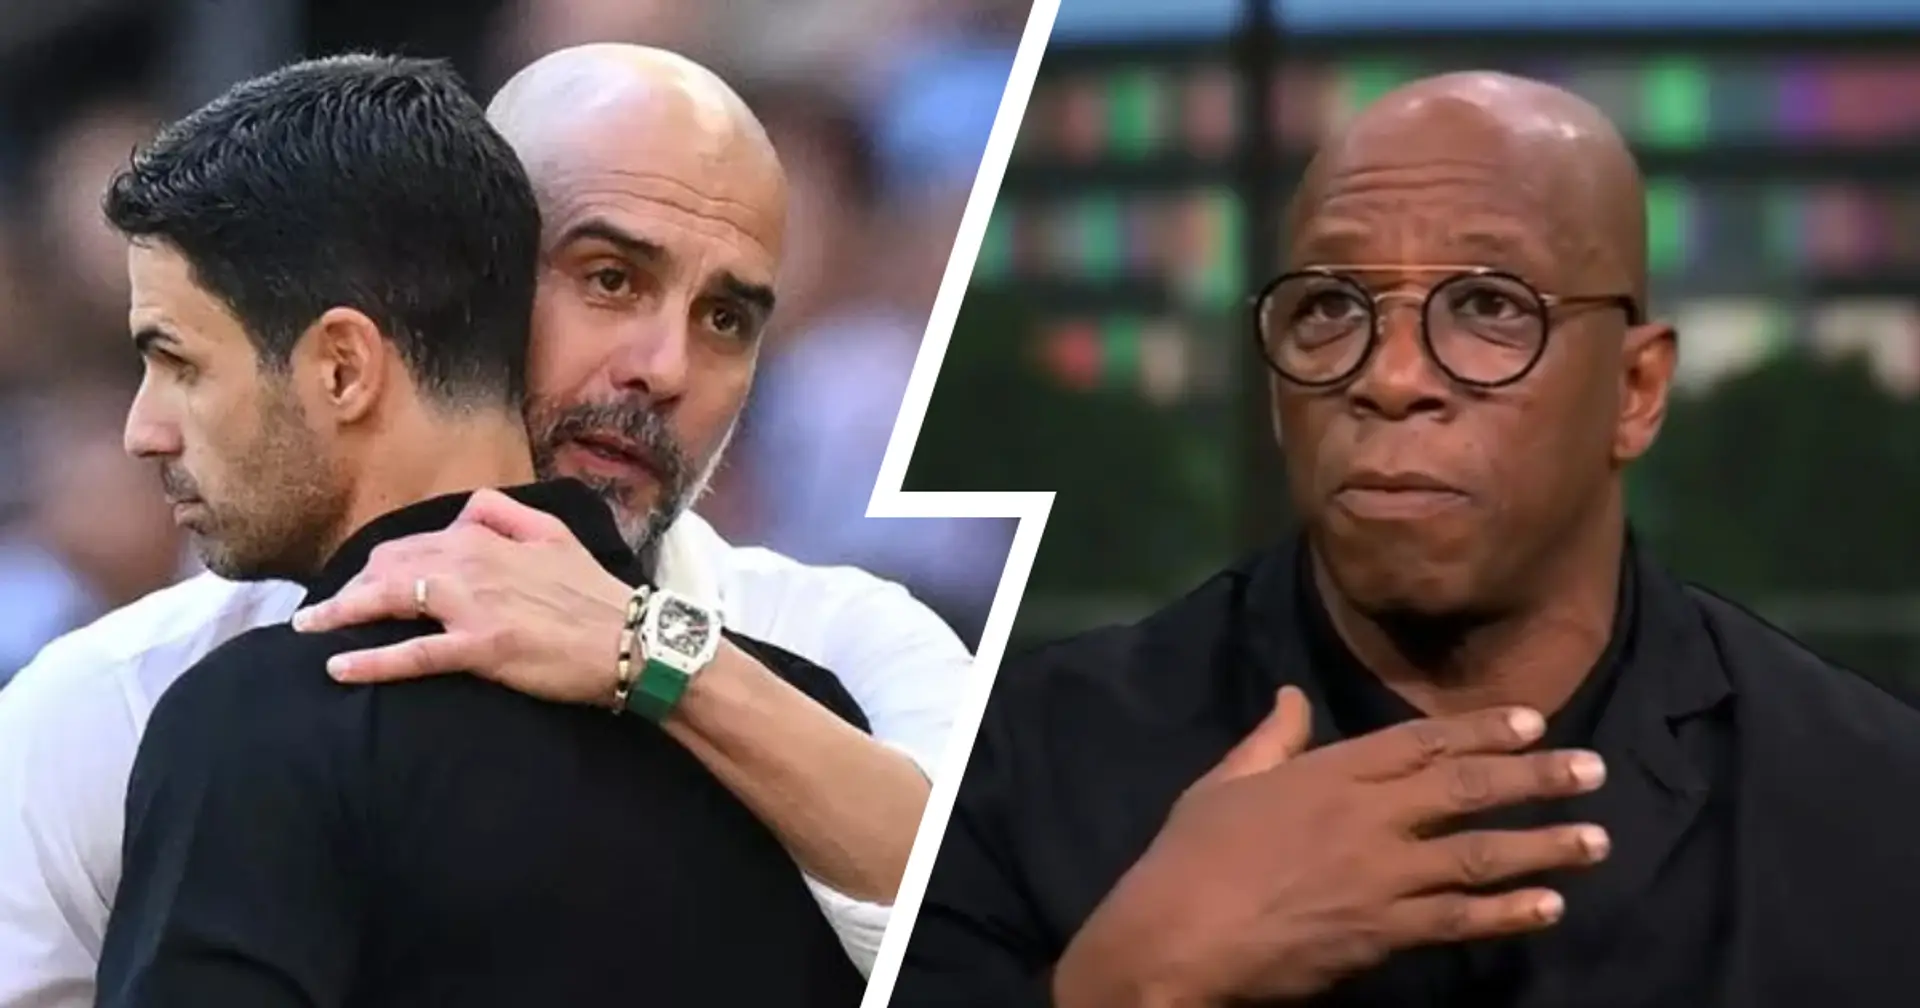 'They're going to have to beat them at least once': Ian Wright sends Man City warning to Arsenal